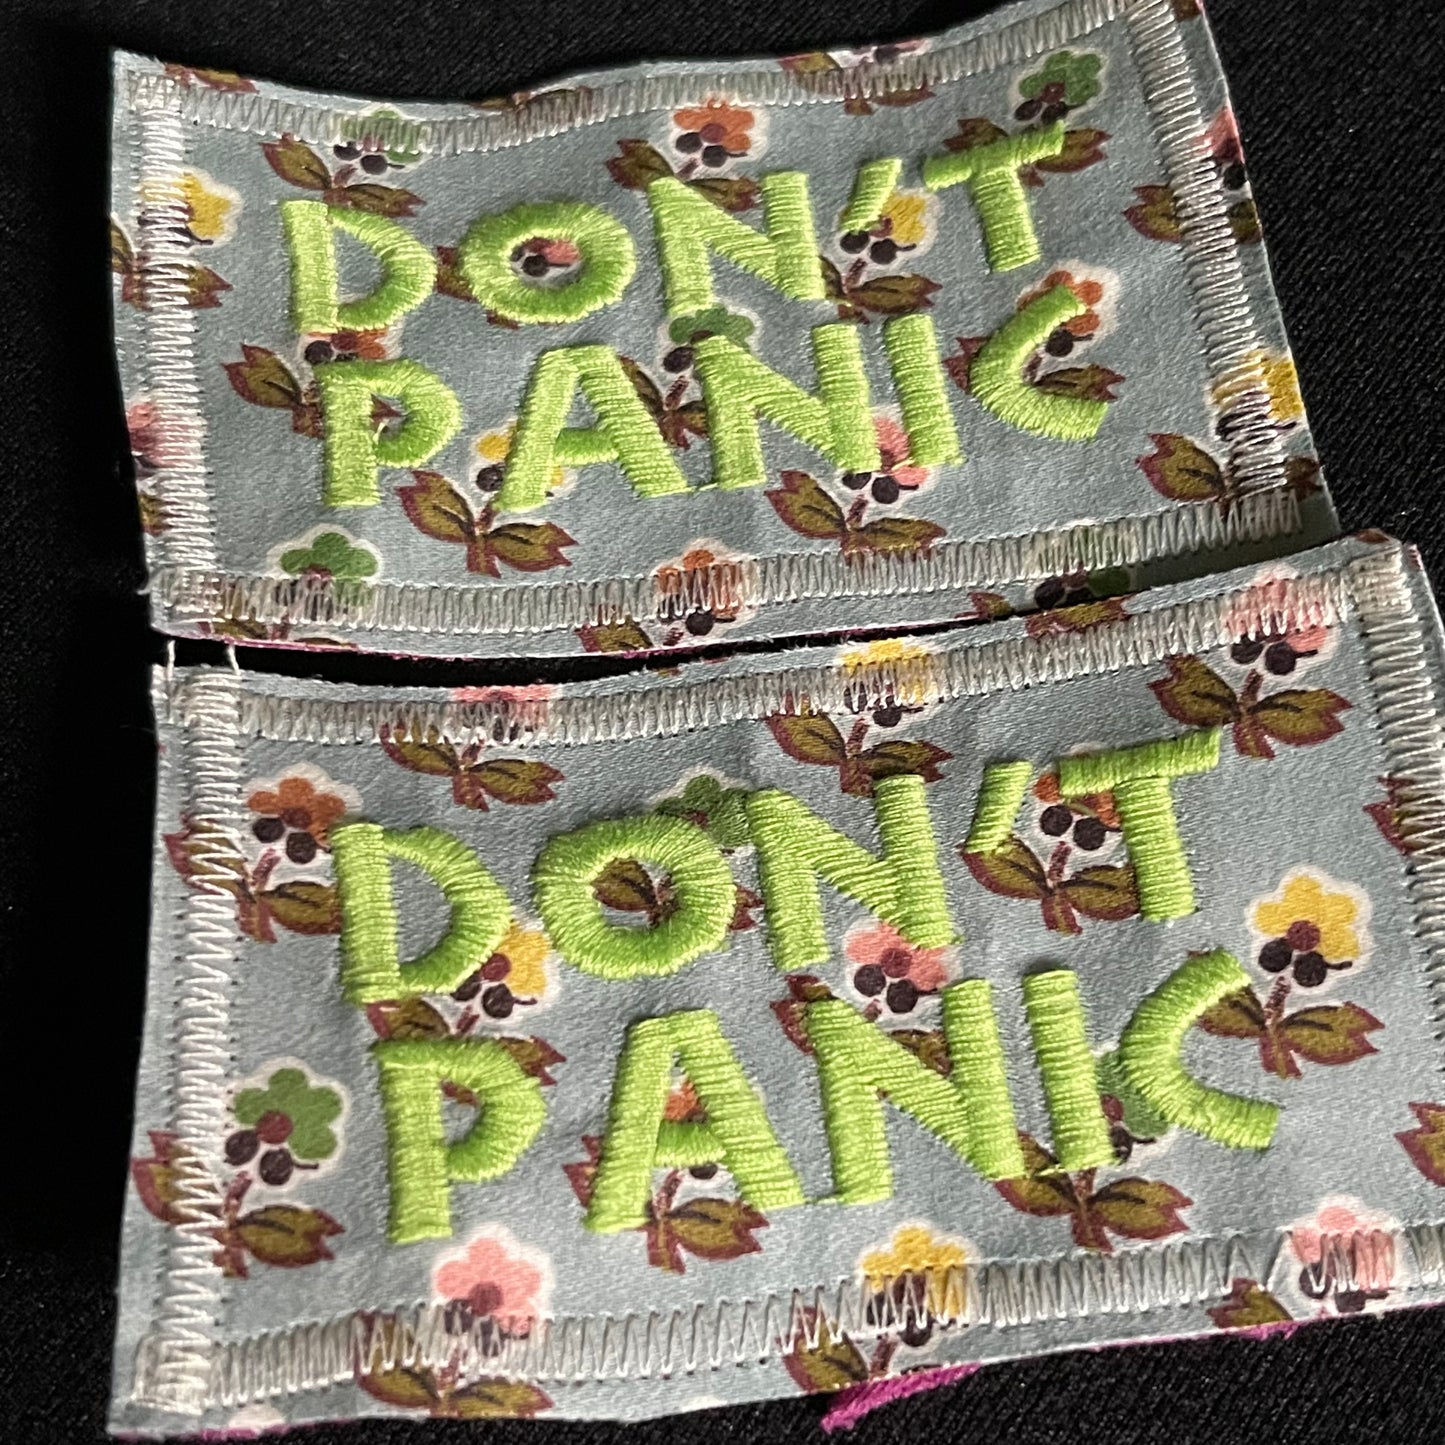 Don’t Panic Patch